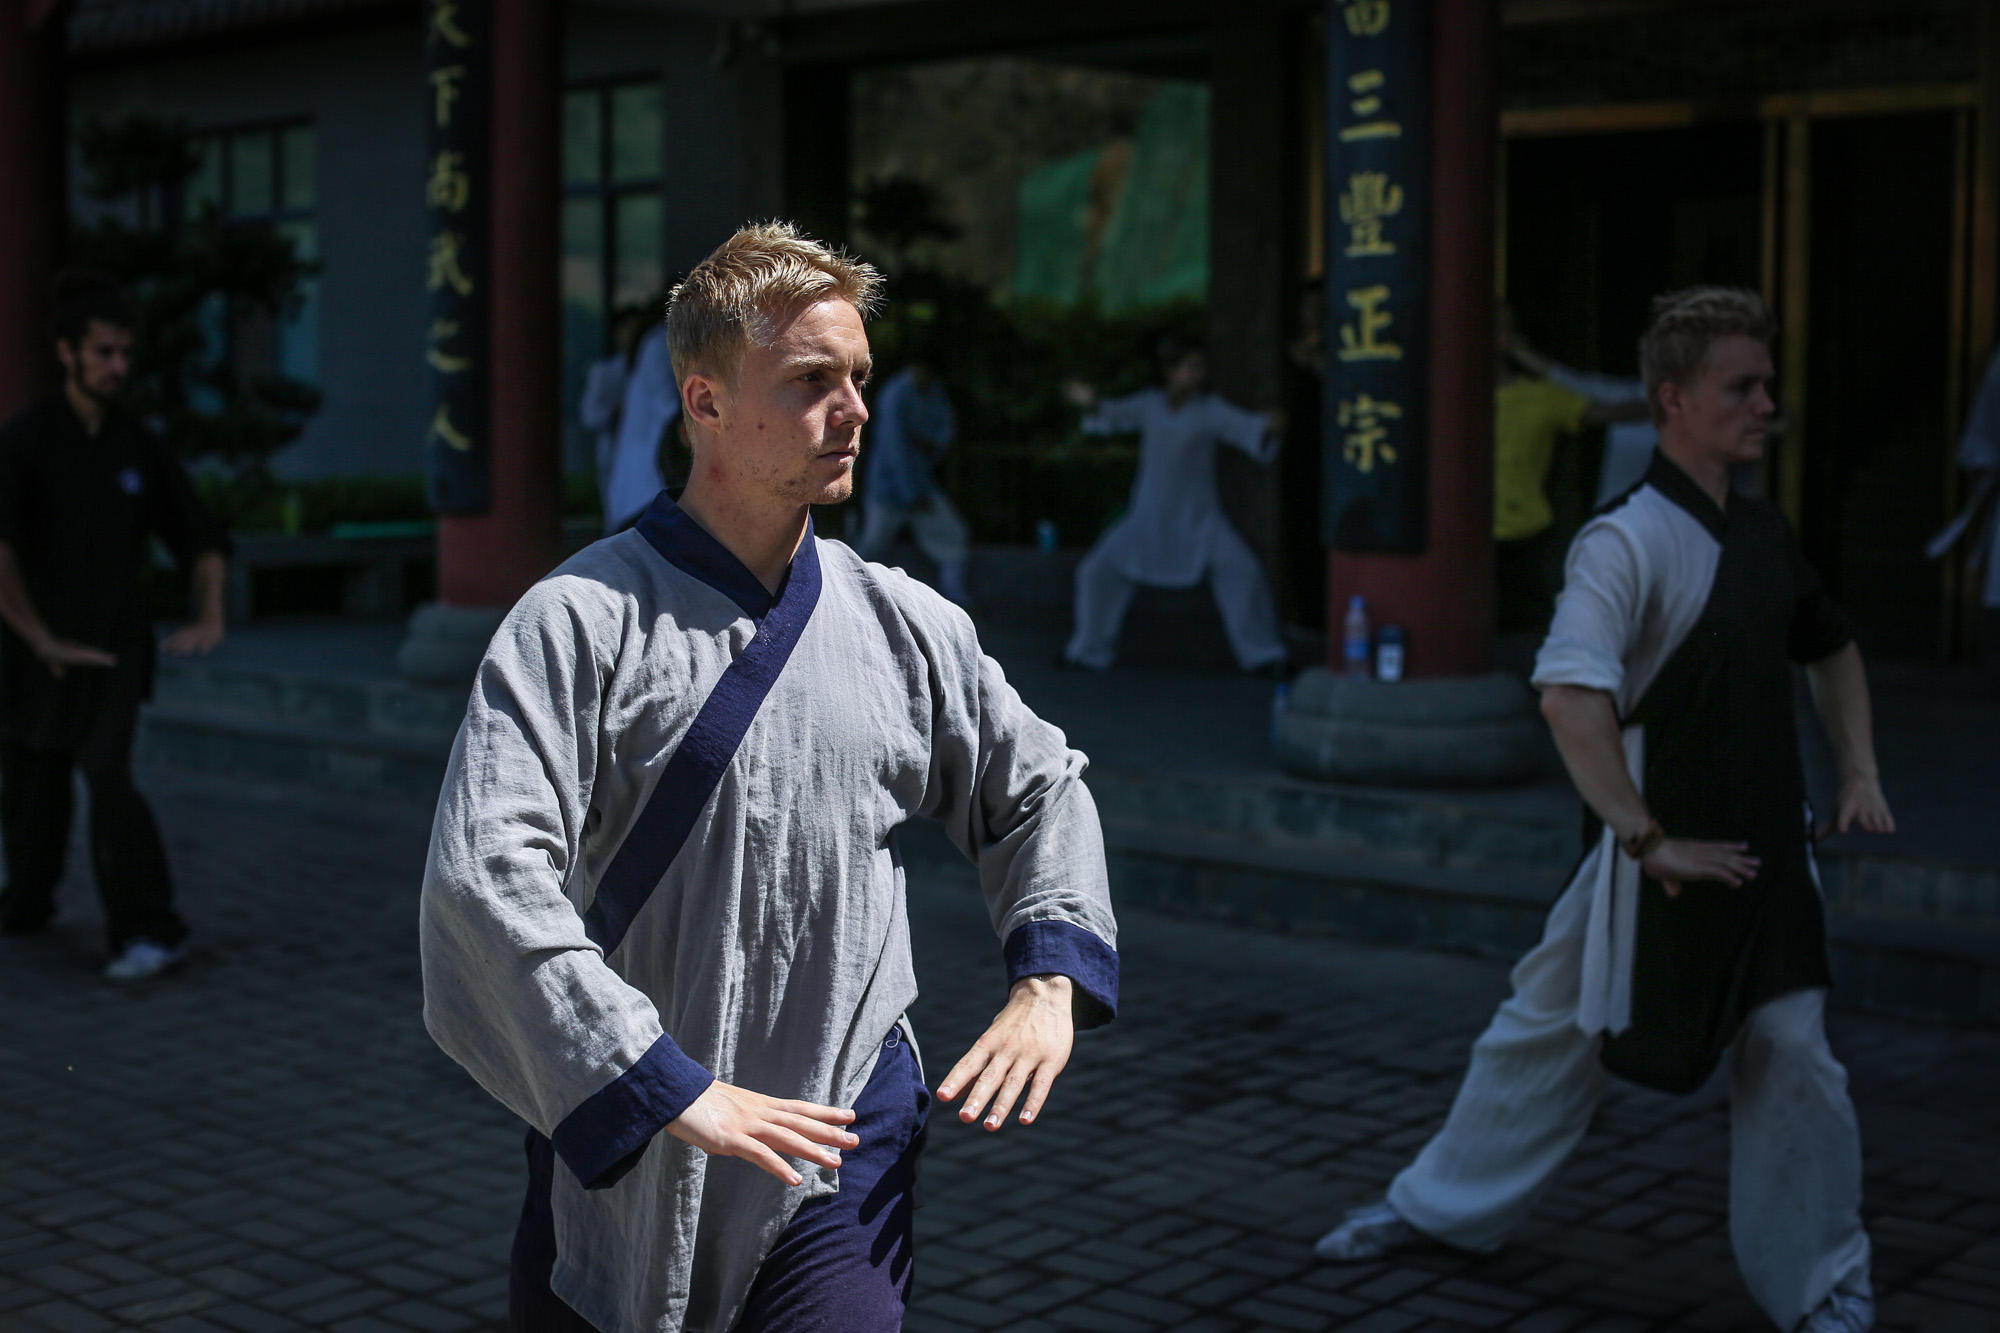 Kristian and Roar, twin brothers from Norway, are devoting themselves to learning Tai Chi on Wudang Mountain. [Photo: inews.qq.com]